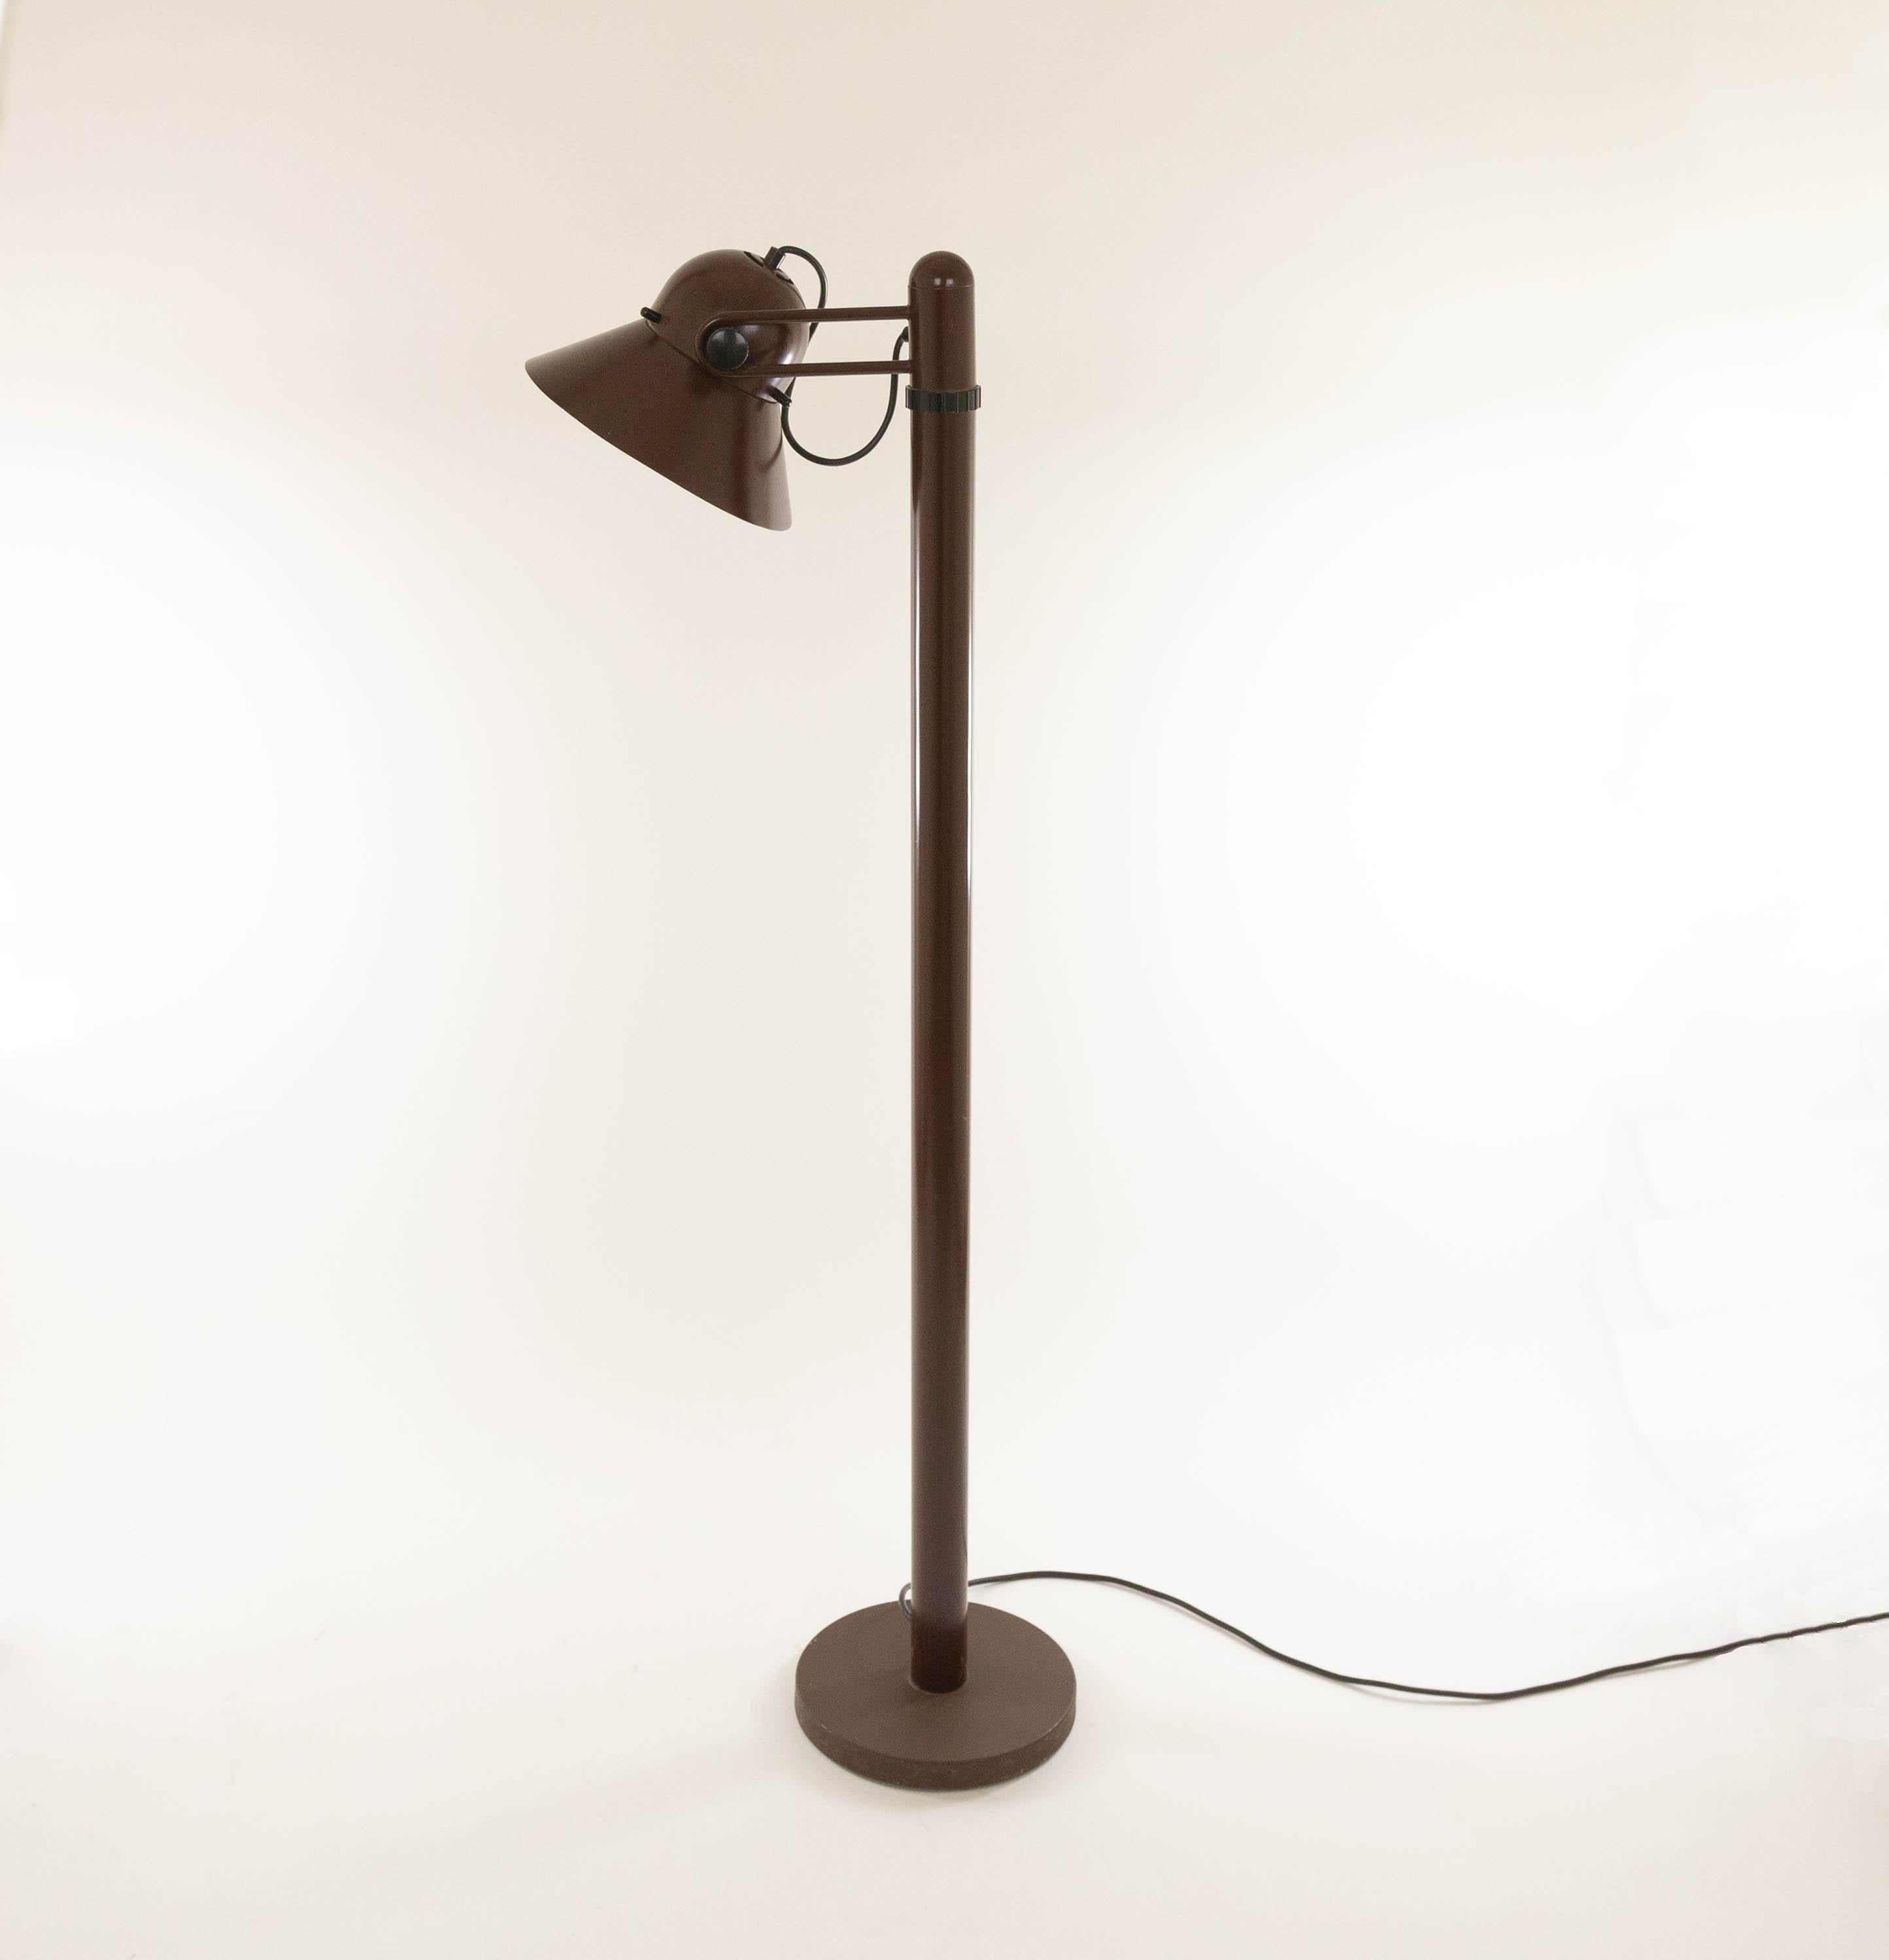 Swiveling dark brown floor lamp of lacquered metal designed by Gae Aulenti and manufactured by Stilnovo in the 1970s. The top section of the lamp can swivel through 360 degrees and the shade itself can be adjusted.

This model had been produced for